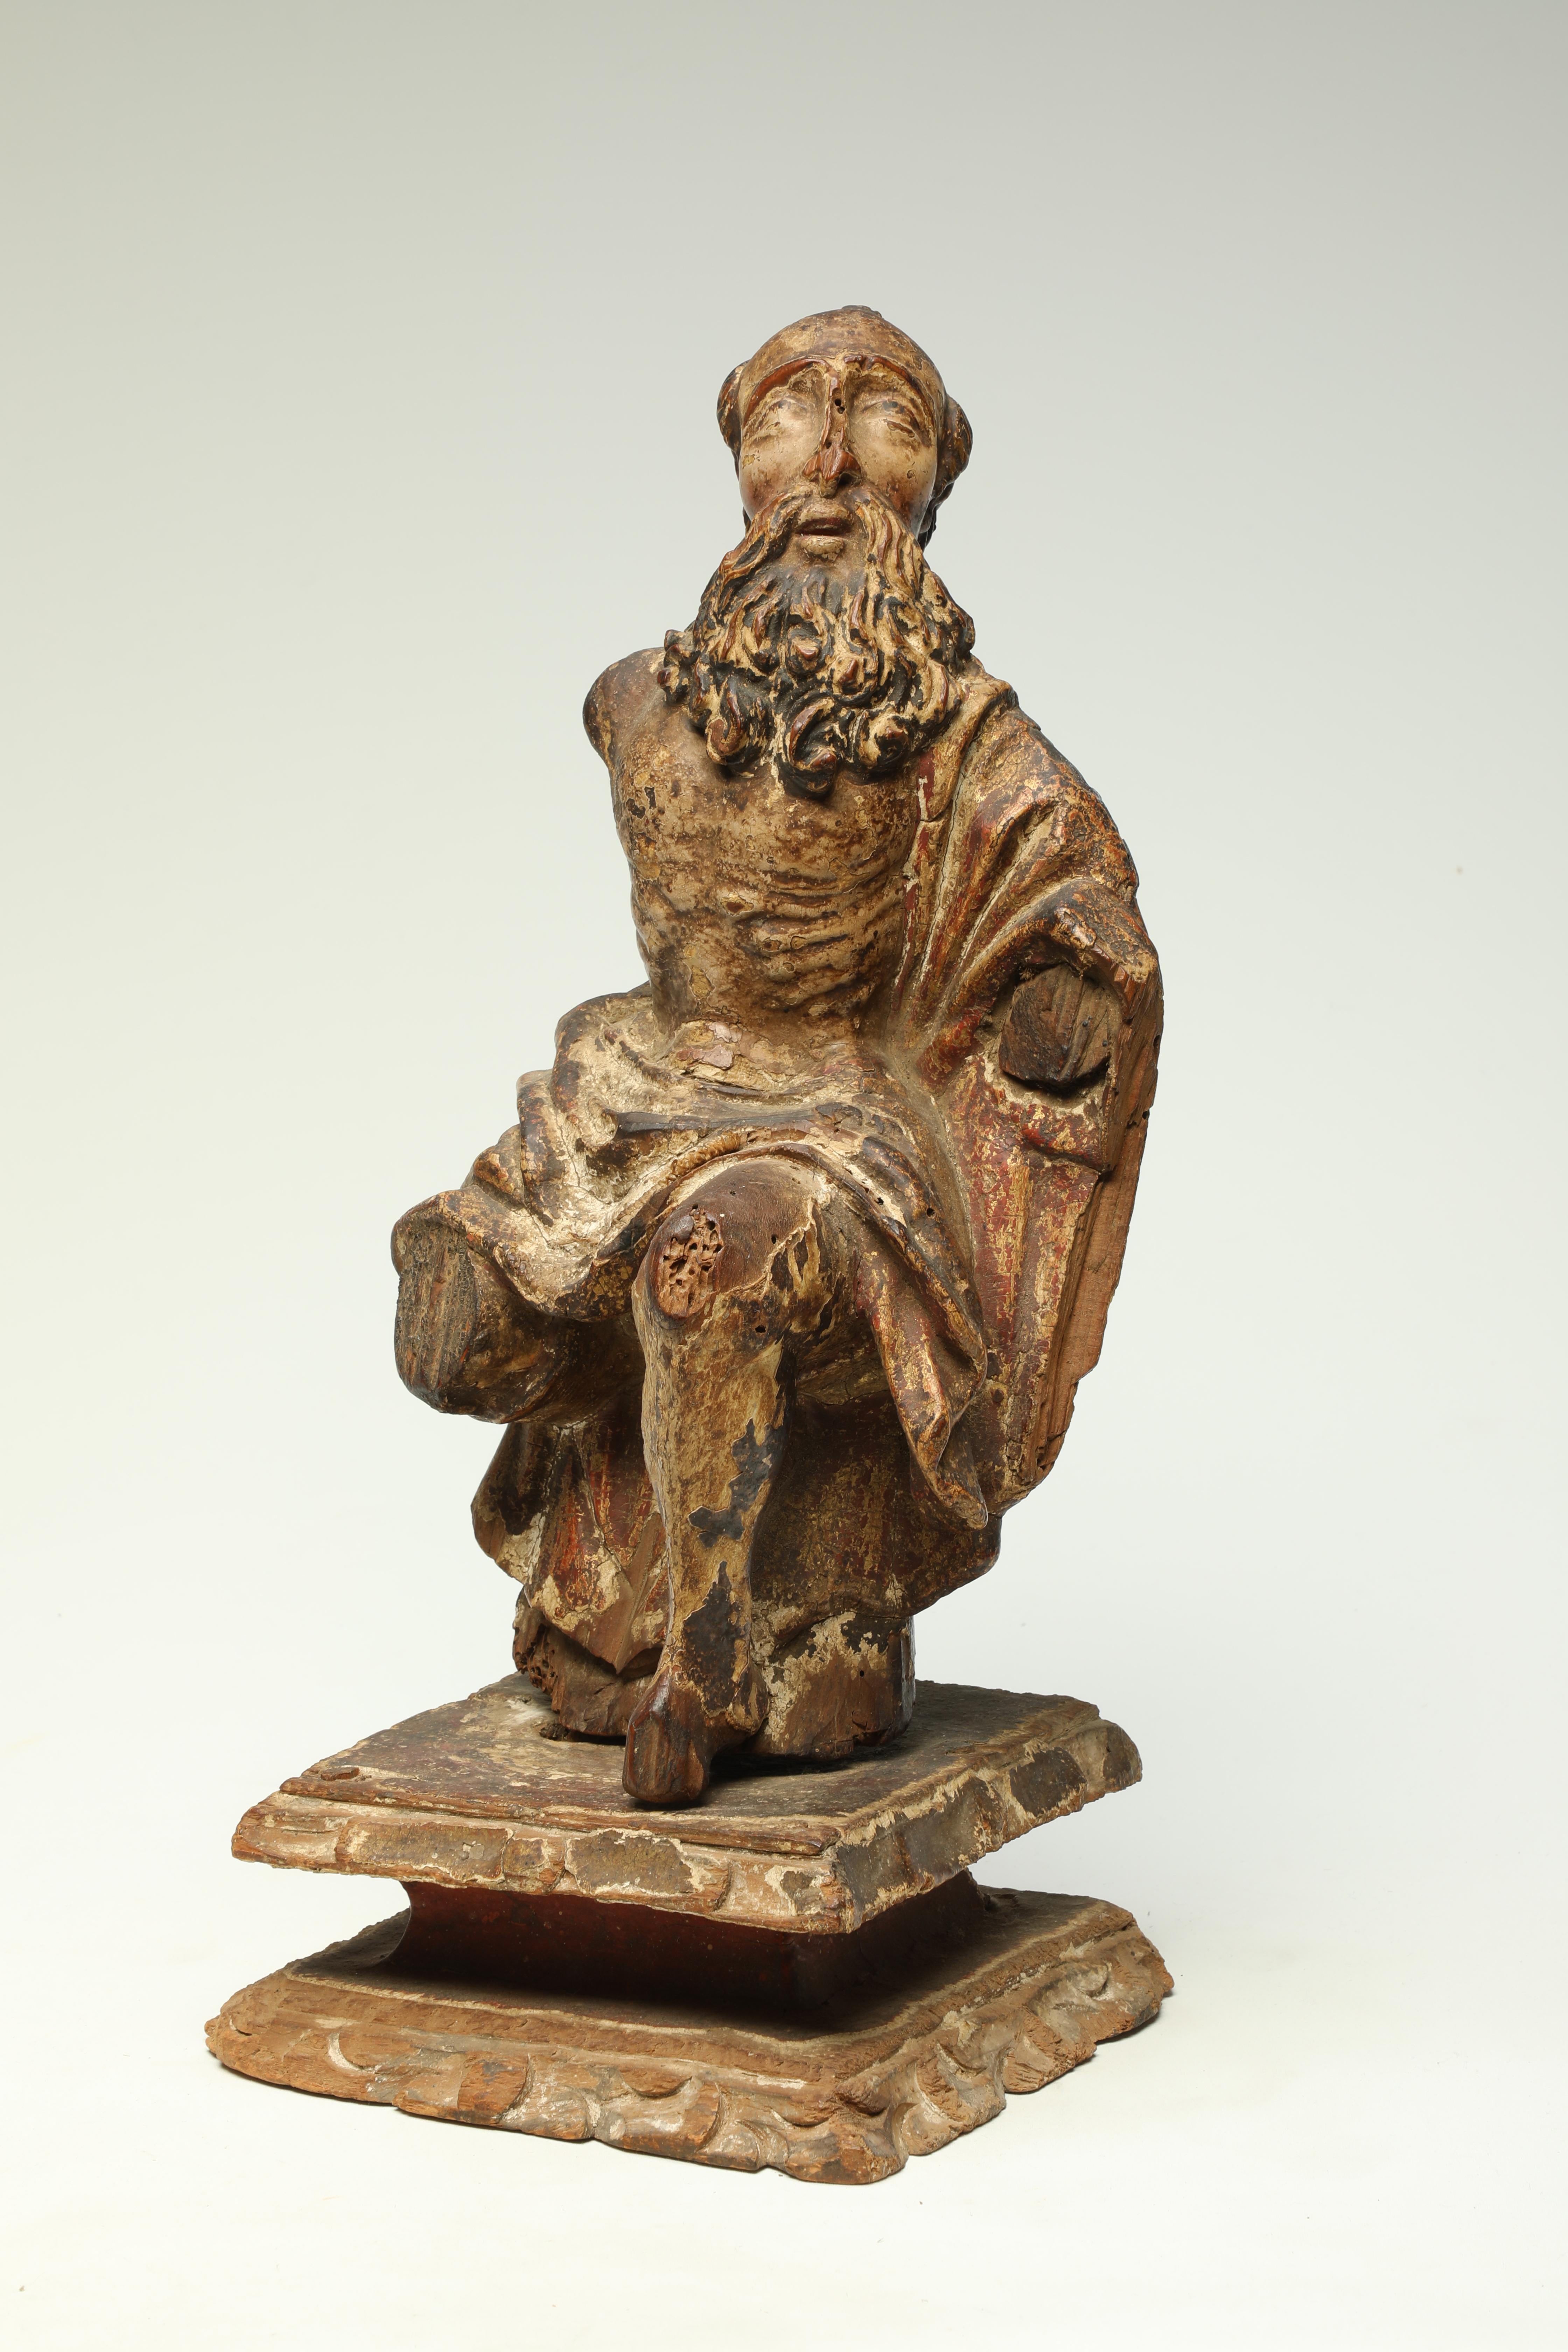 Antique 17th-18th Century Wood Italian Seated Saint Figure Fragment with Beard In Distressed Condition For Sale In Point Richmond, CA